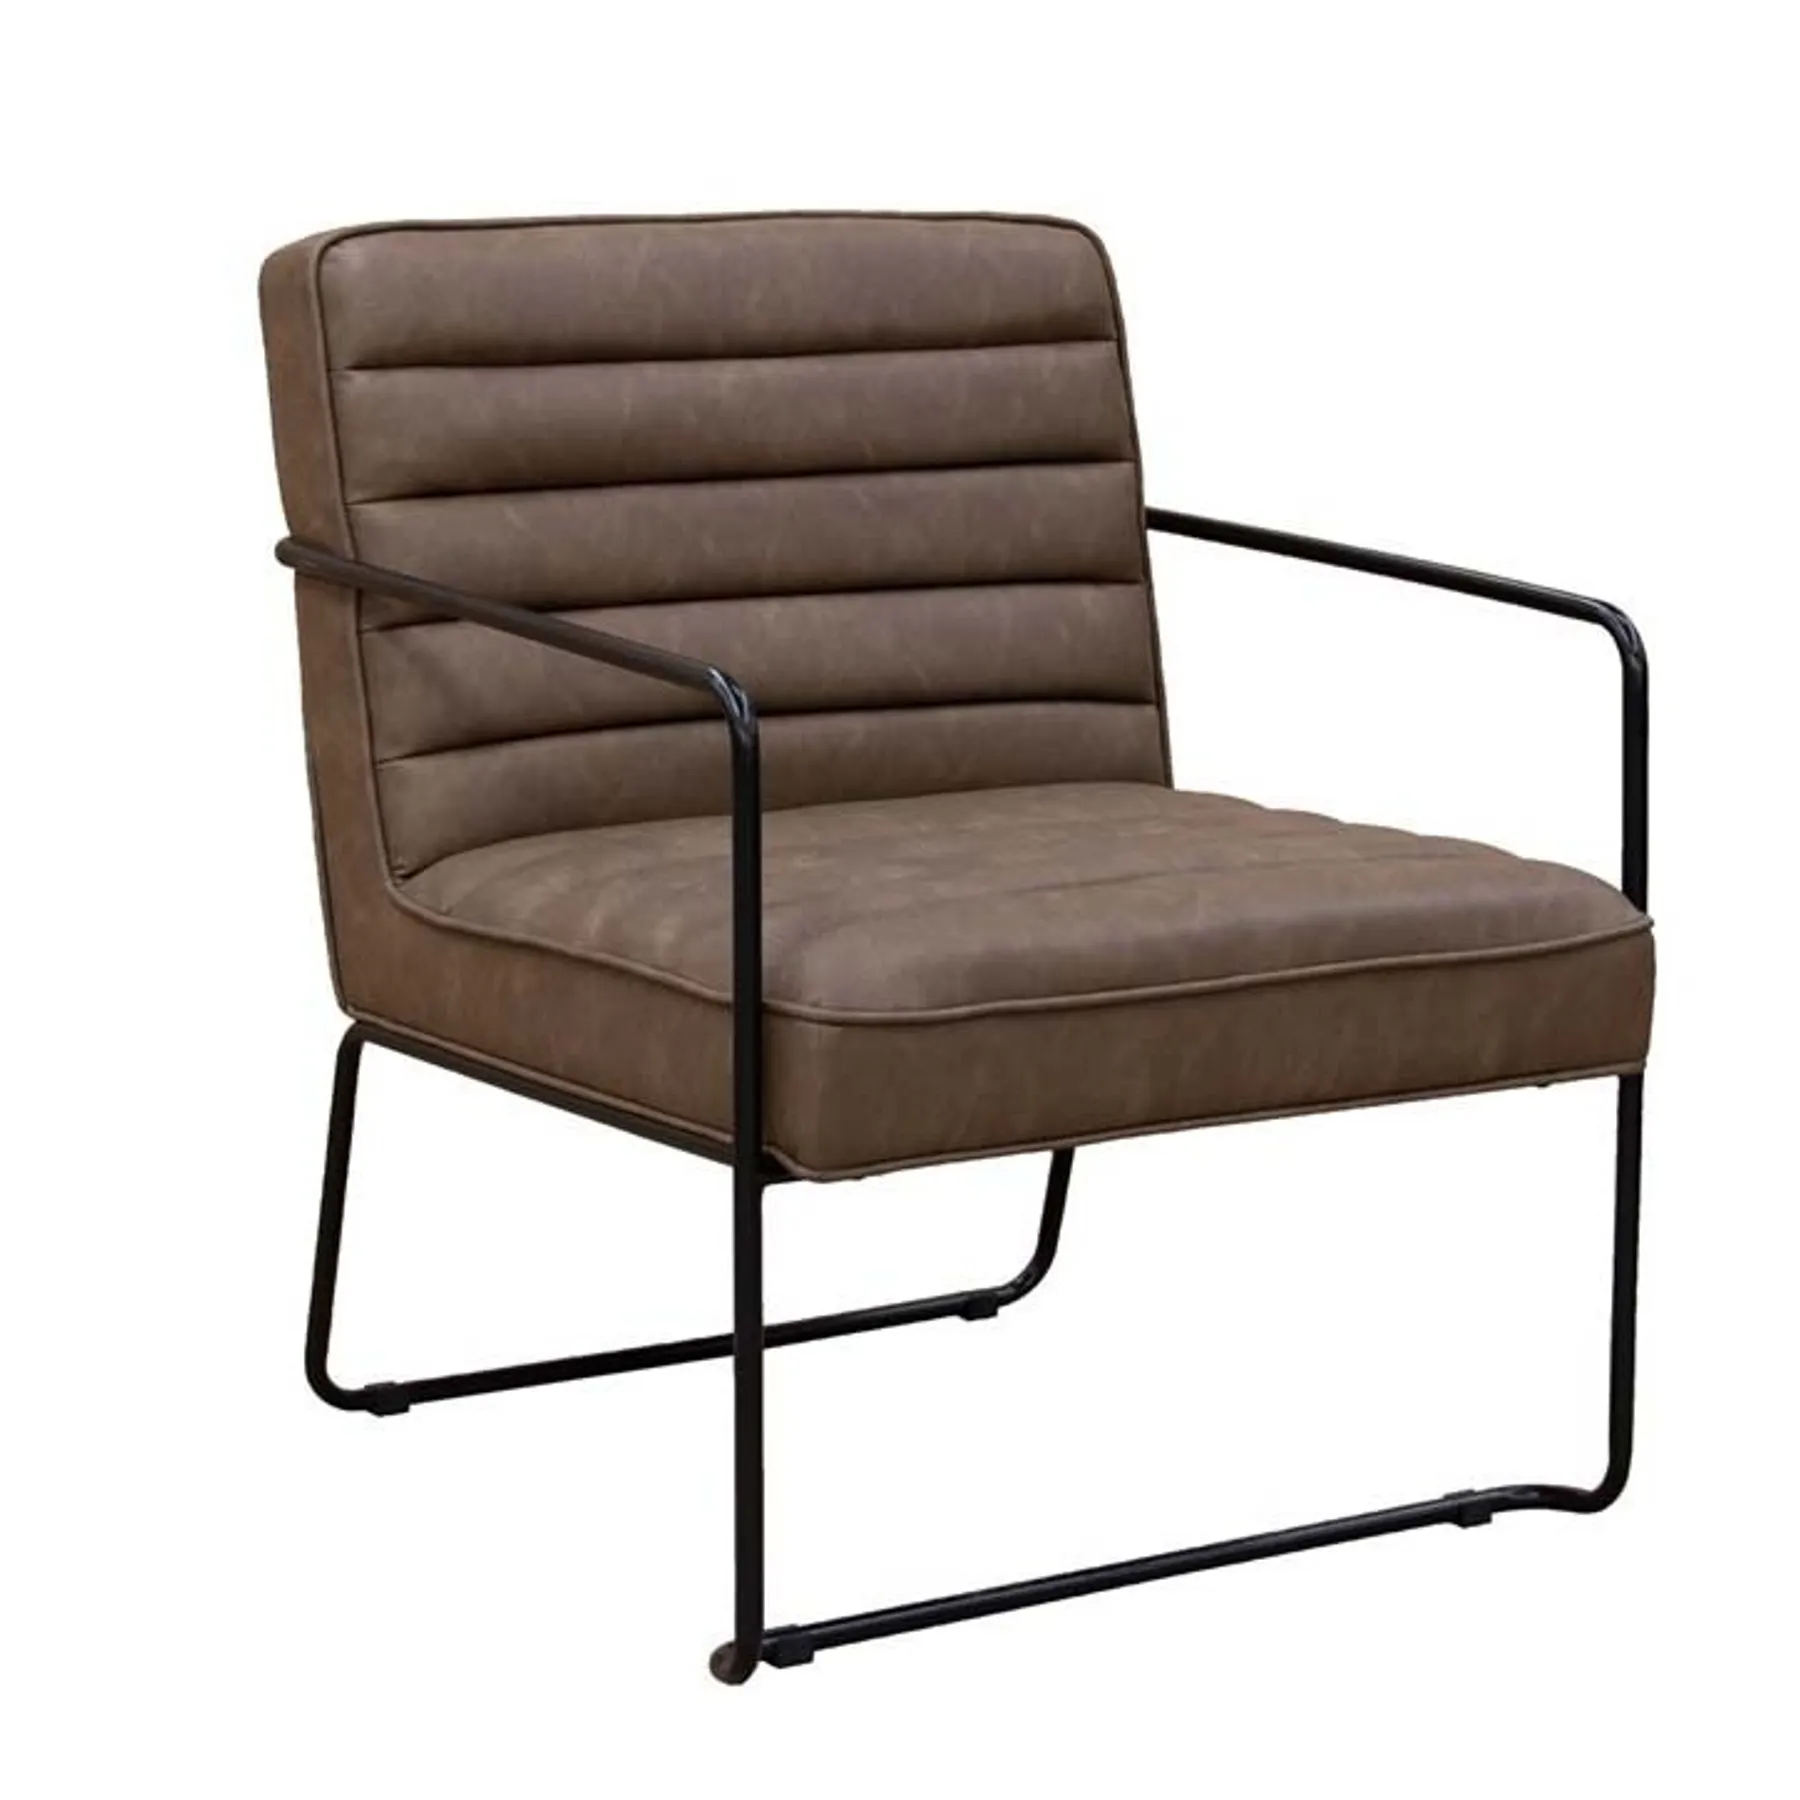 DEC01 BR Ribbed leather visitor chair